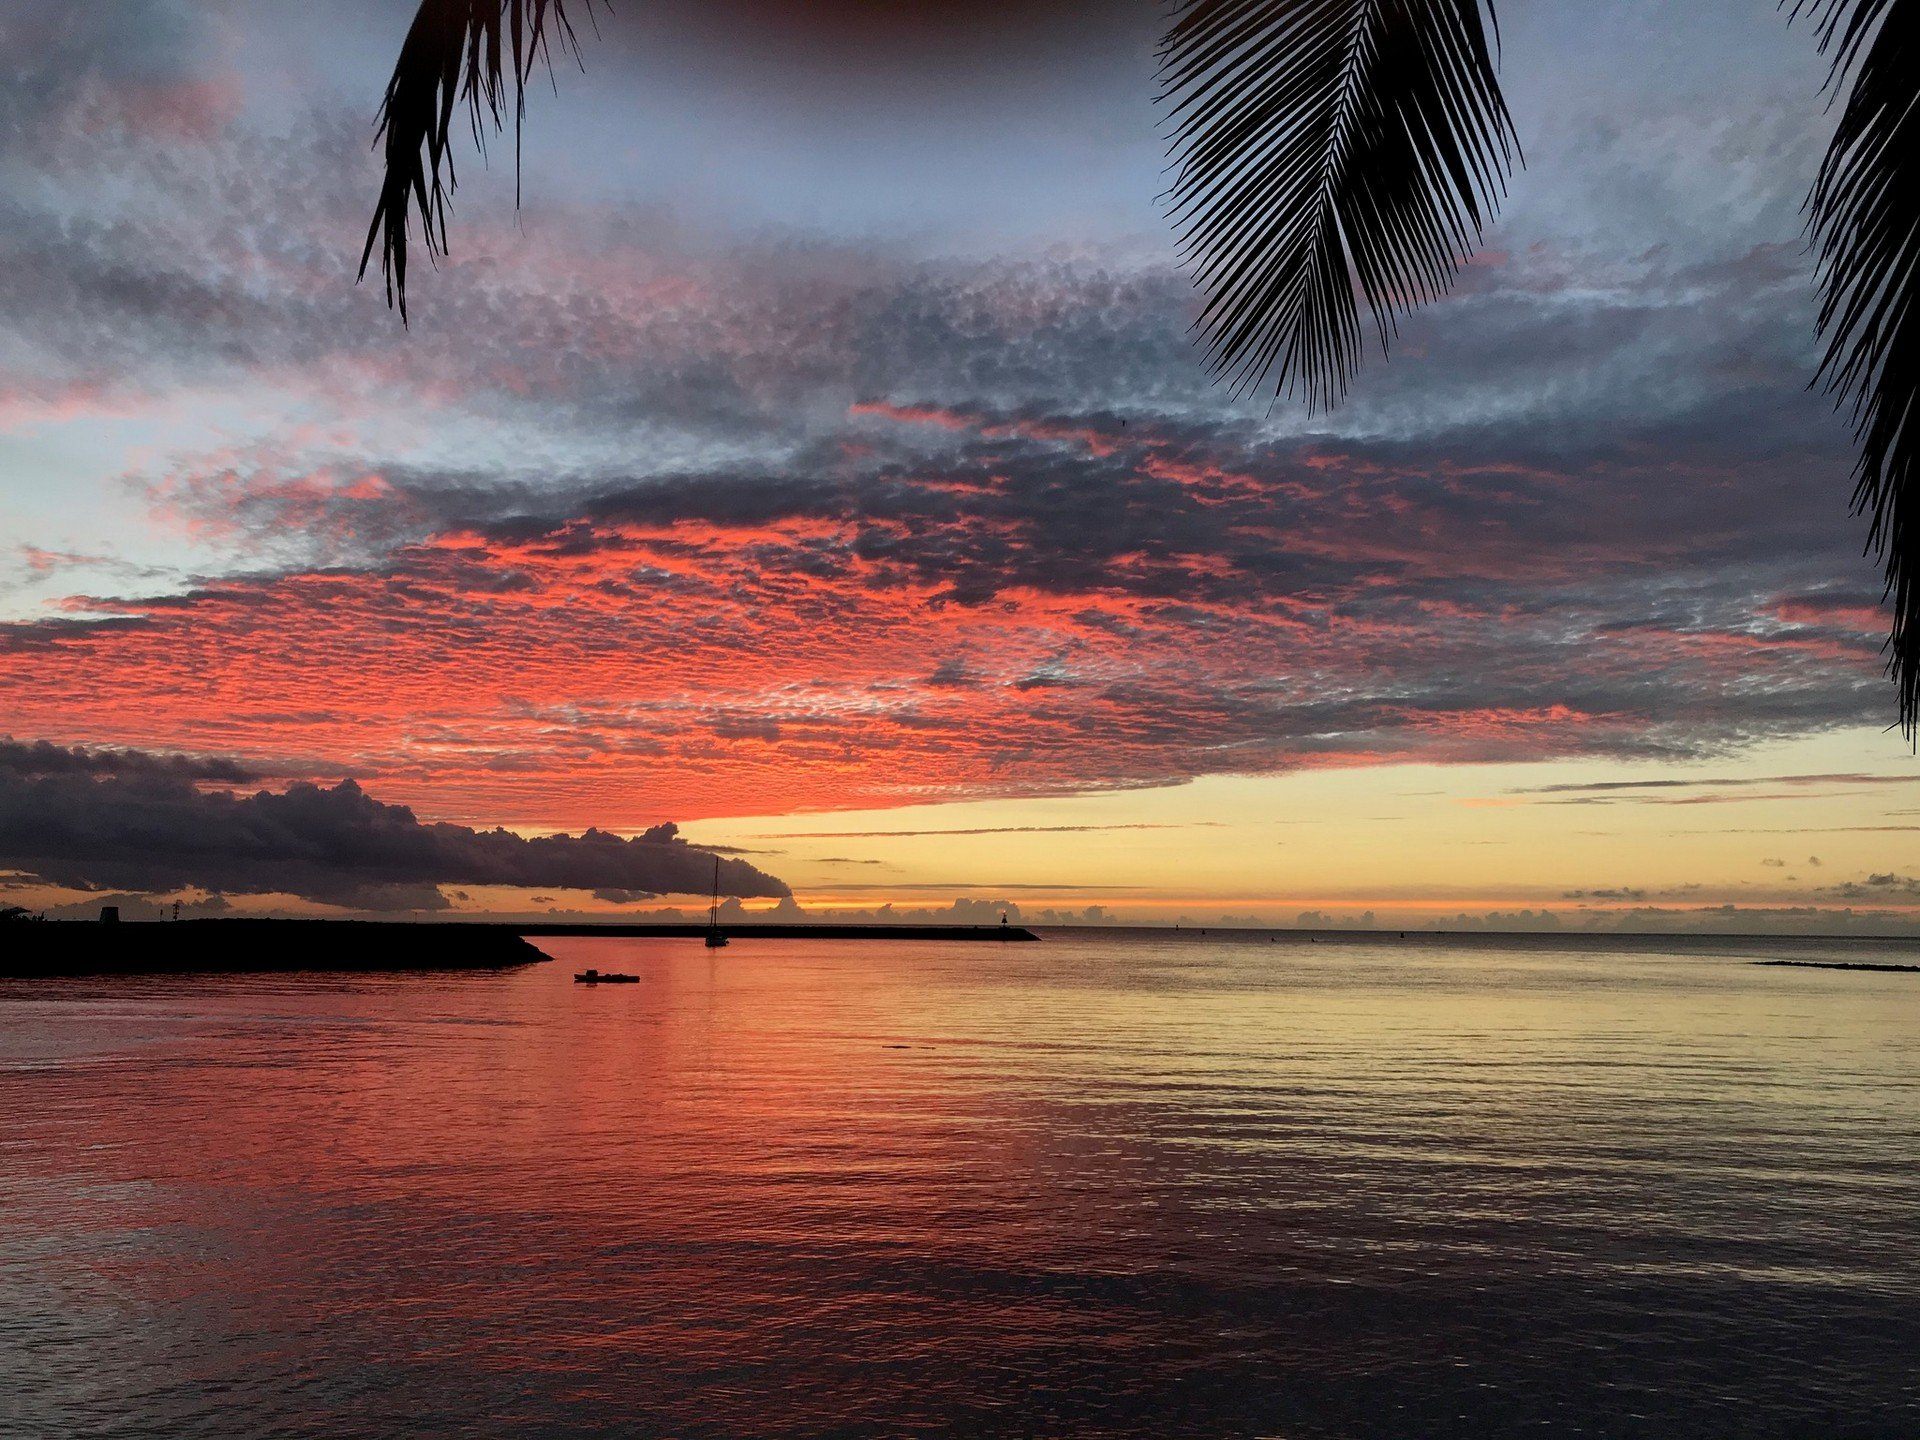 Image of a sunset in Hawai'i. Oahu sunset tours are available with north shore tour boat companies.